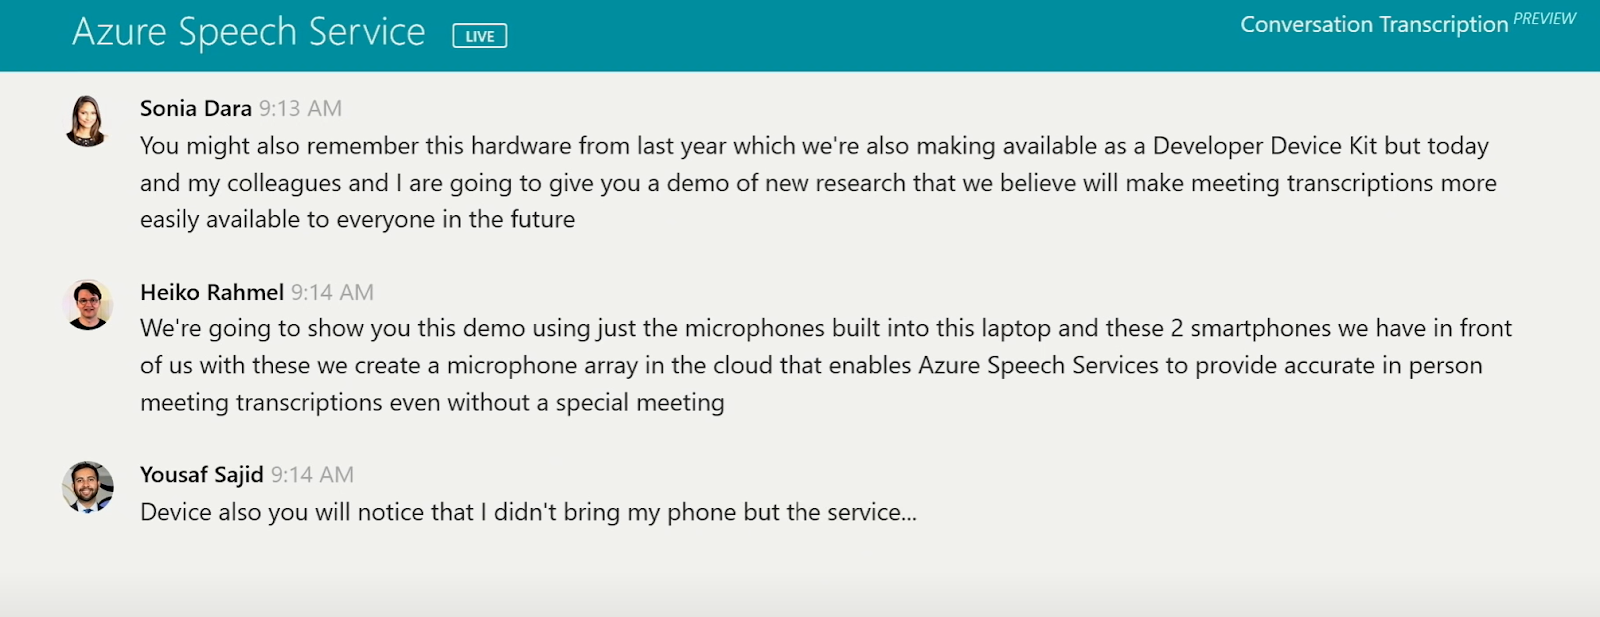 User interface of Microsoft Azure’s speech-to-text and speaker identification